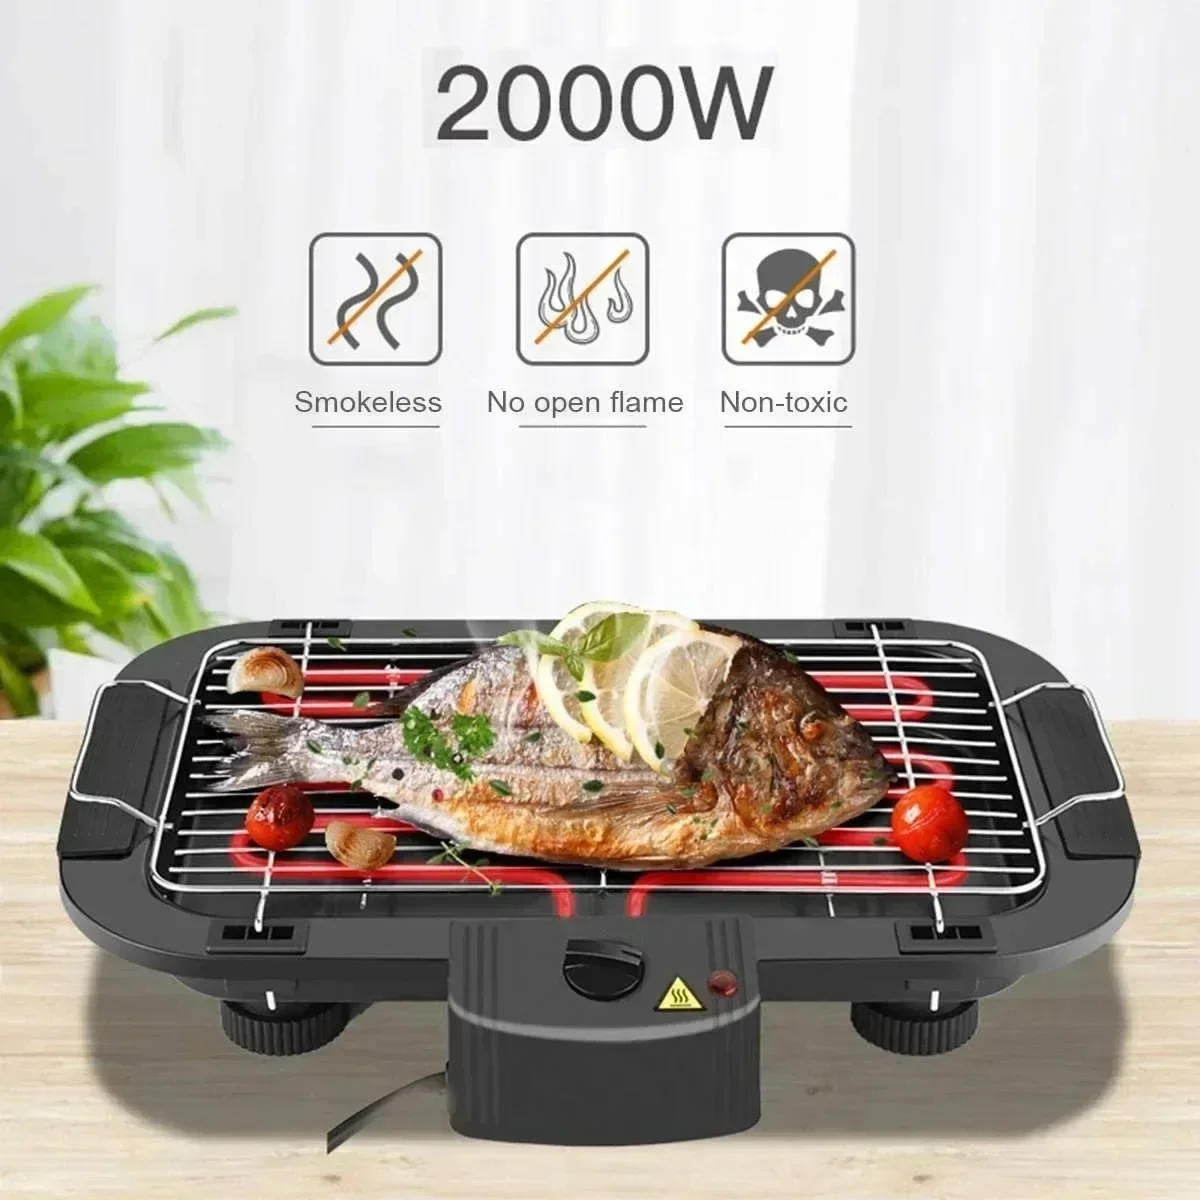 

2000W Electric BBQ Grill Multi-function Smokeless Barbecue Machine Home BBQ Grills Indoor Roast Meat Dish Plate Multi Cookers